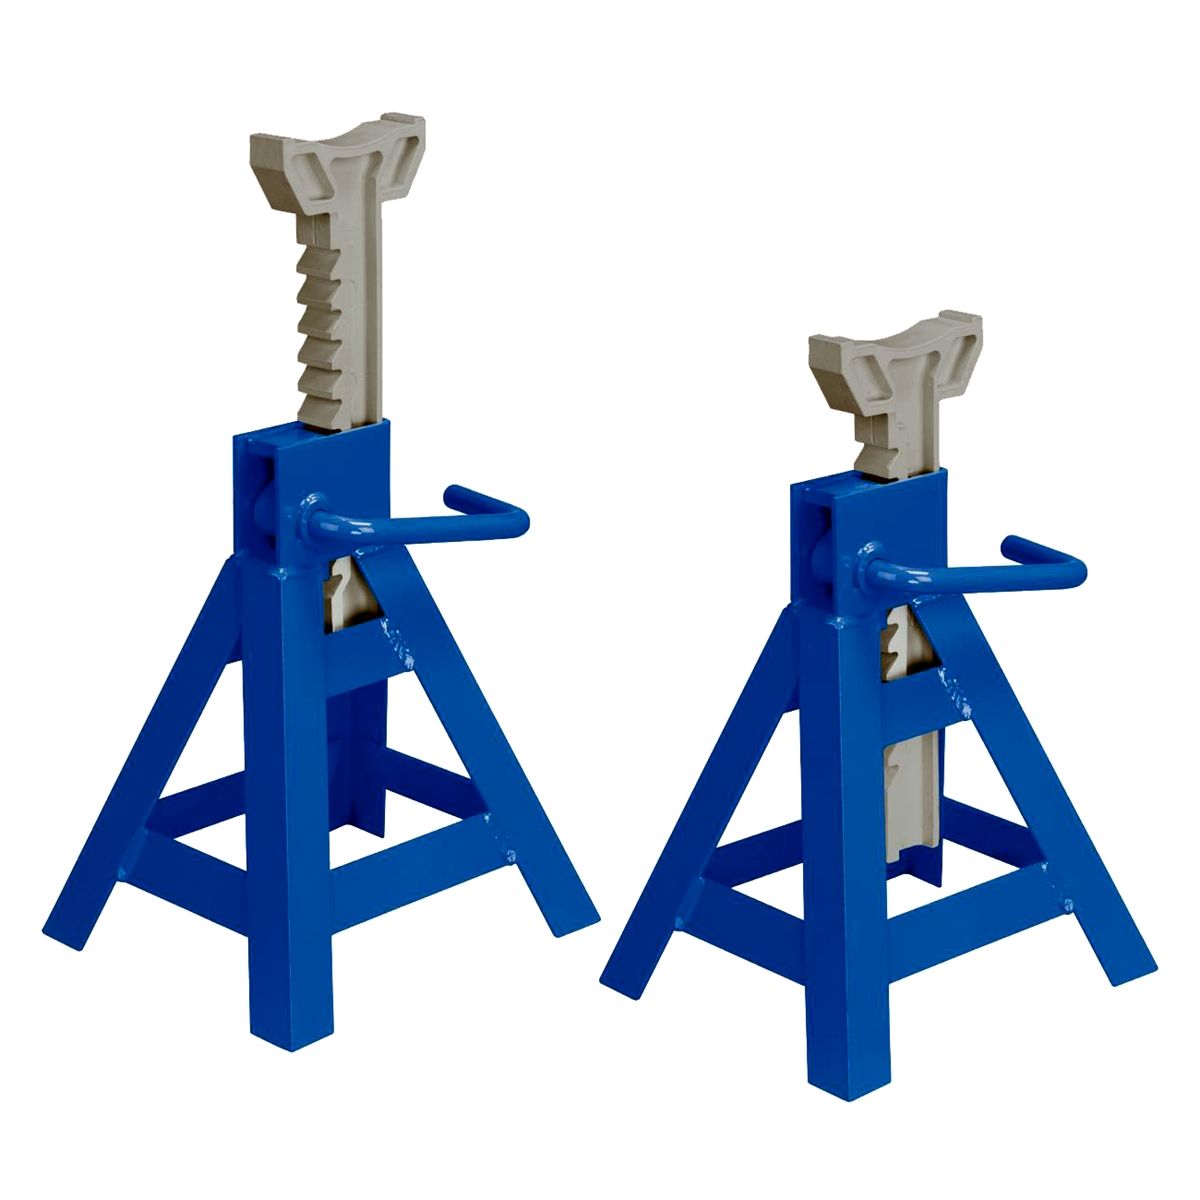 10-Ton Capacity Ratcheting Jack Stands Pair